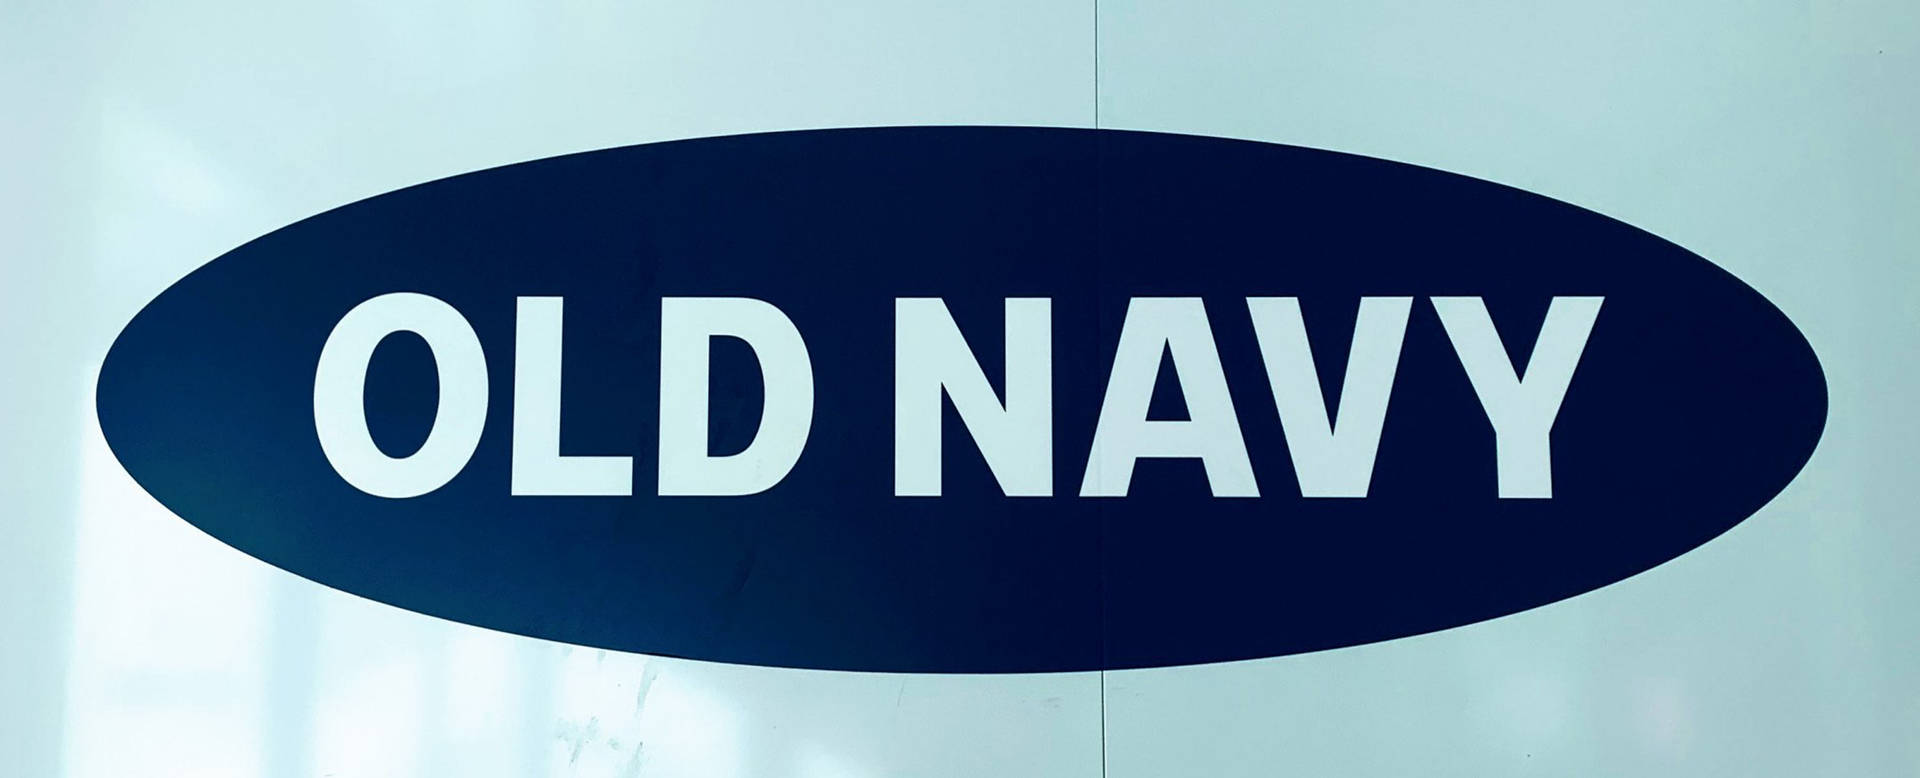 Old Navy Town Square Nevada Background